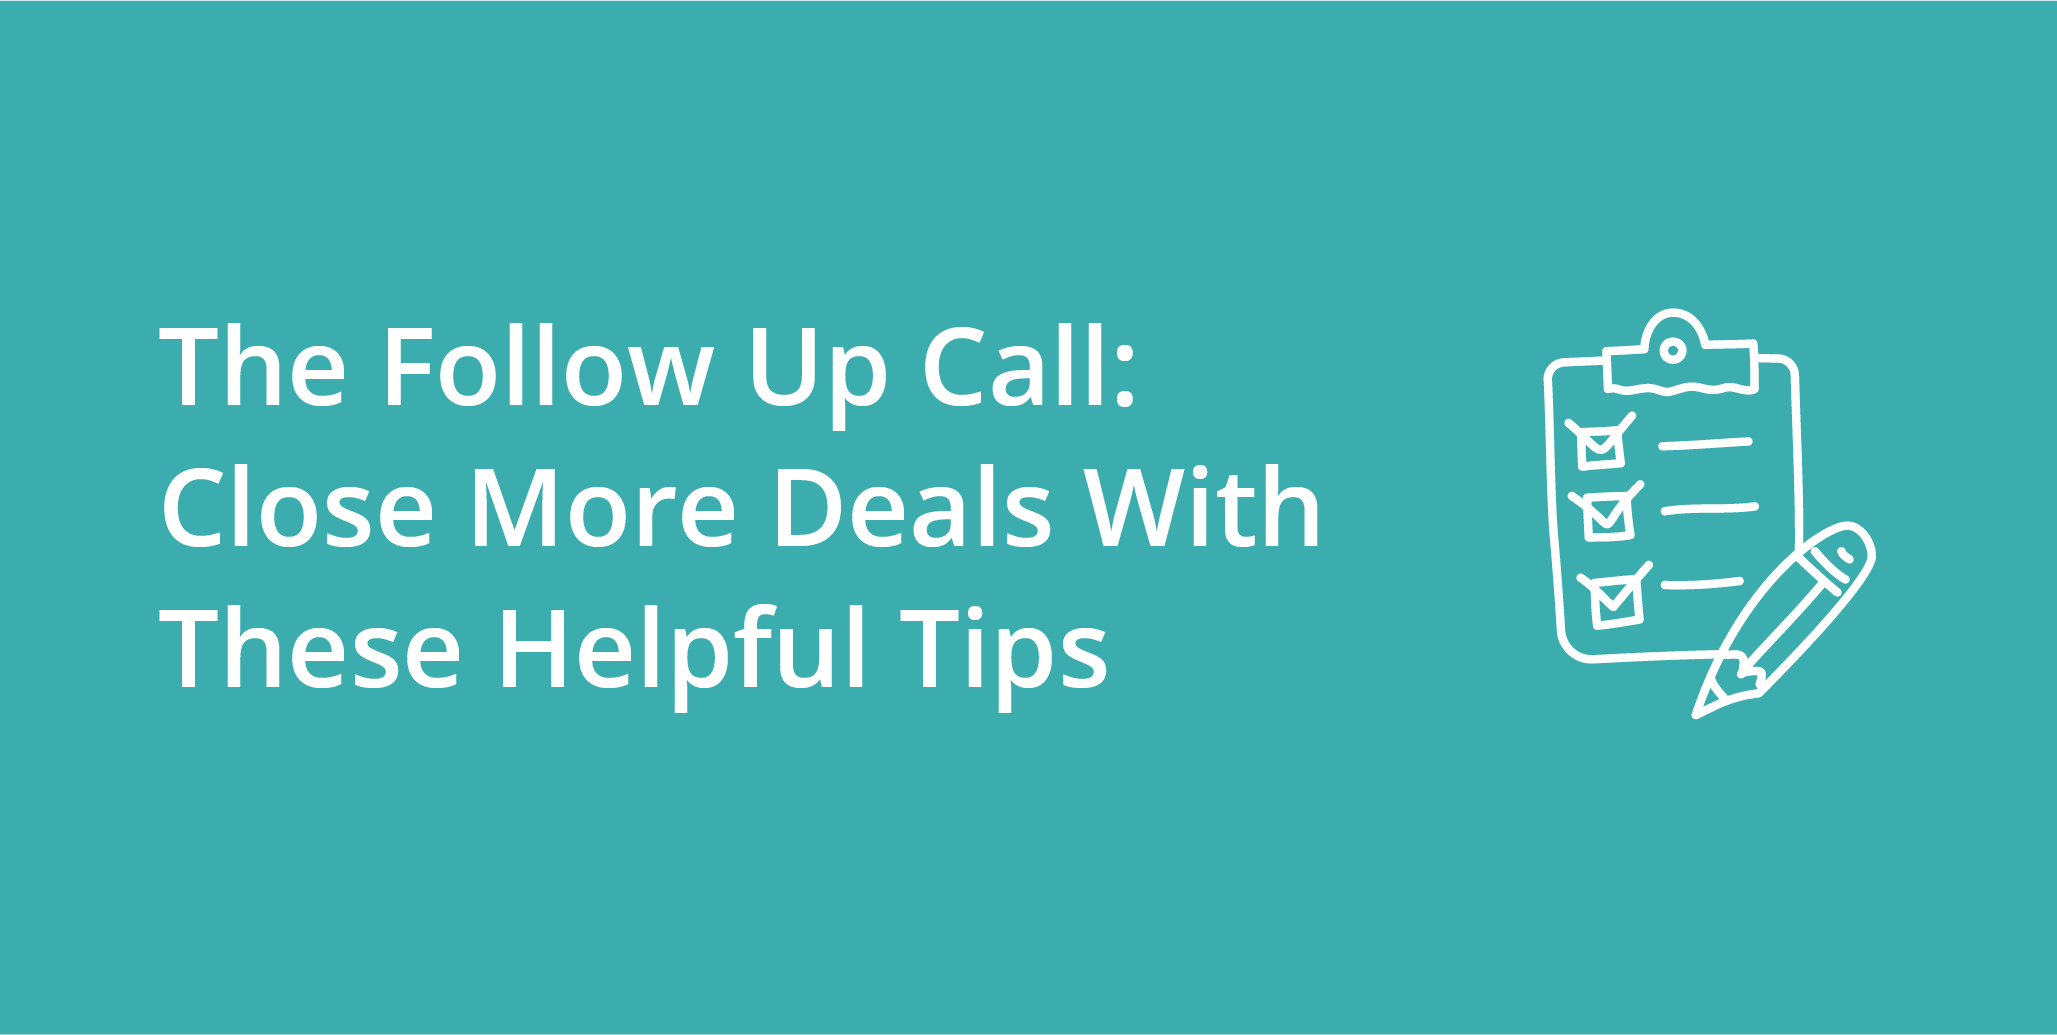 /assets/img/uploads/articles/the-follow-up-call-close-more-deals-with-these-helpful-tips.png